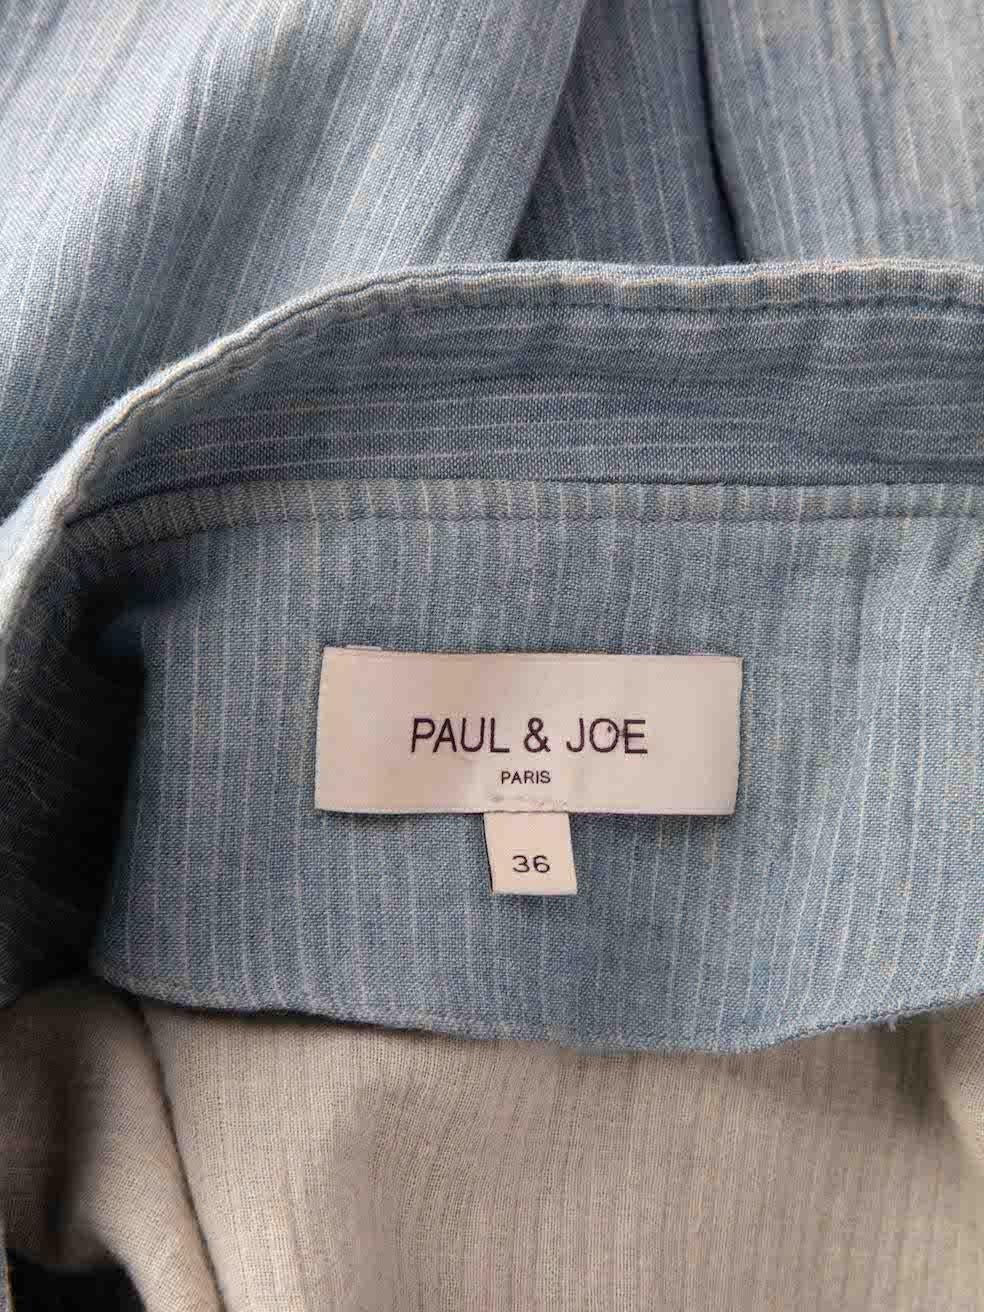 Paul & Joe Blue Cotton Striped Pattern Jacket & Trouser Set Size S In Excellent Condition For Sale In London, GB